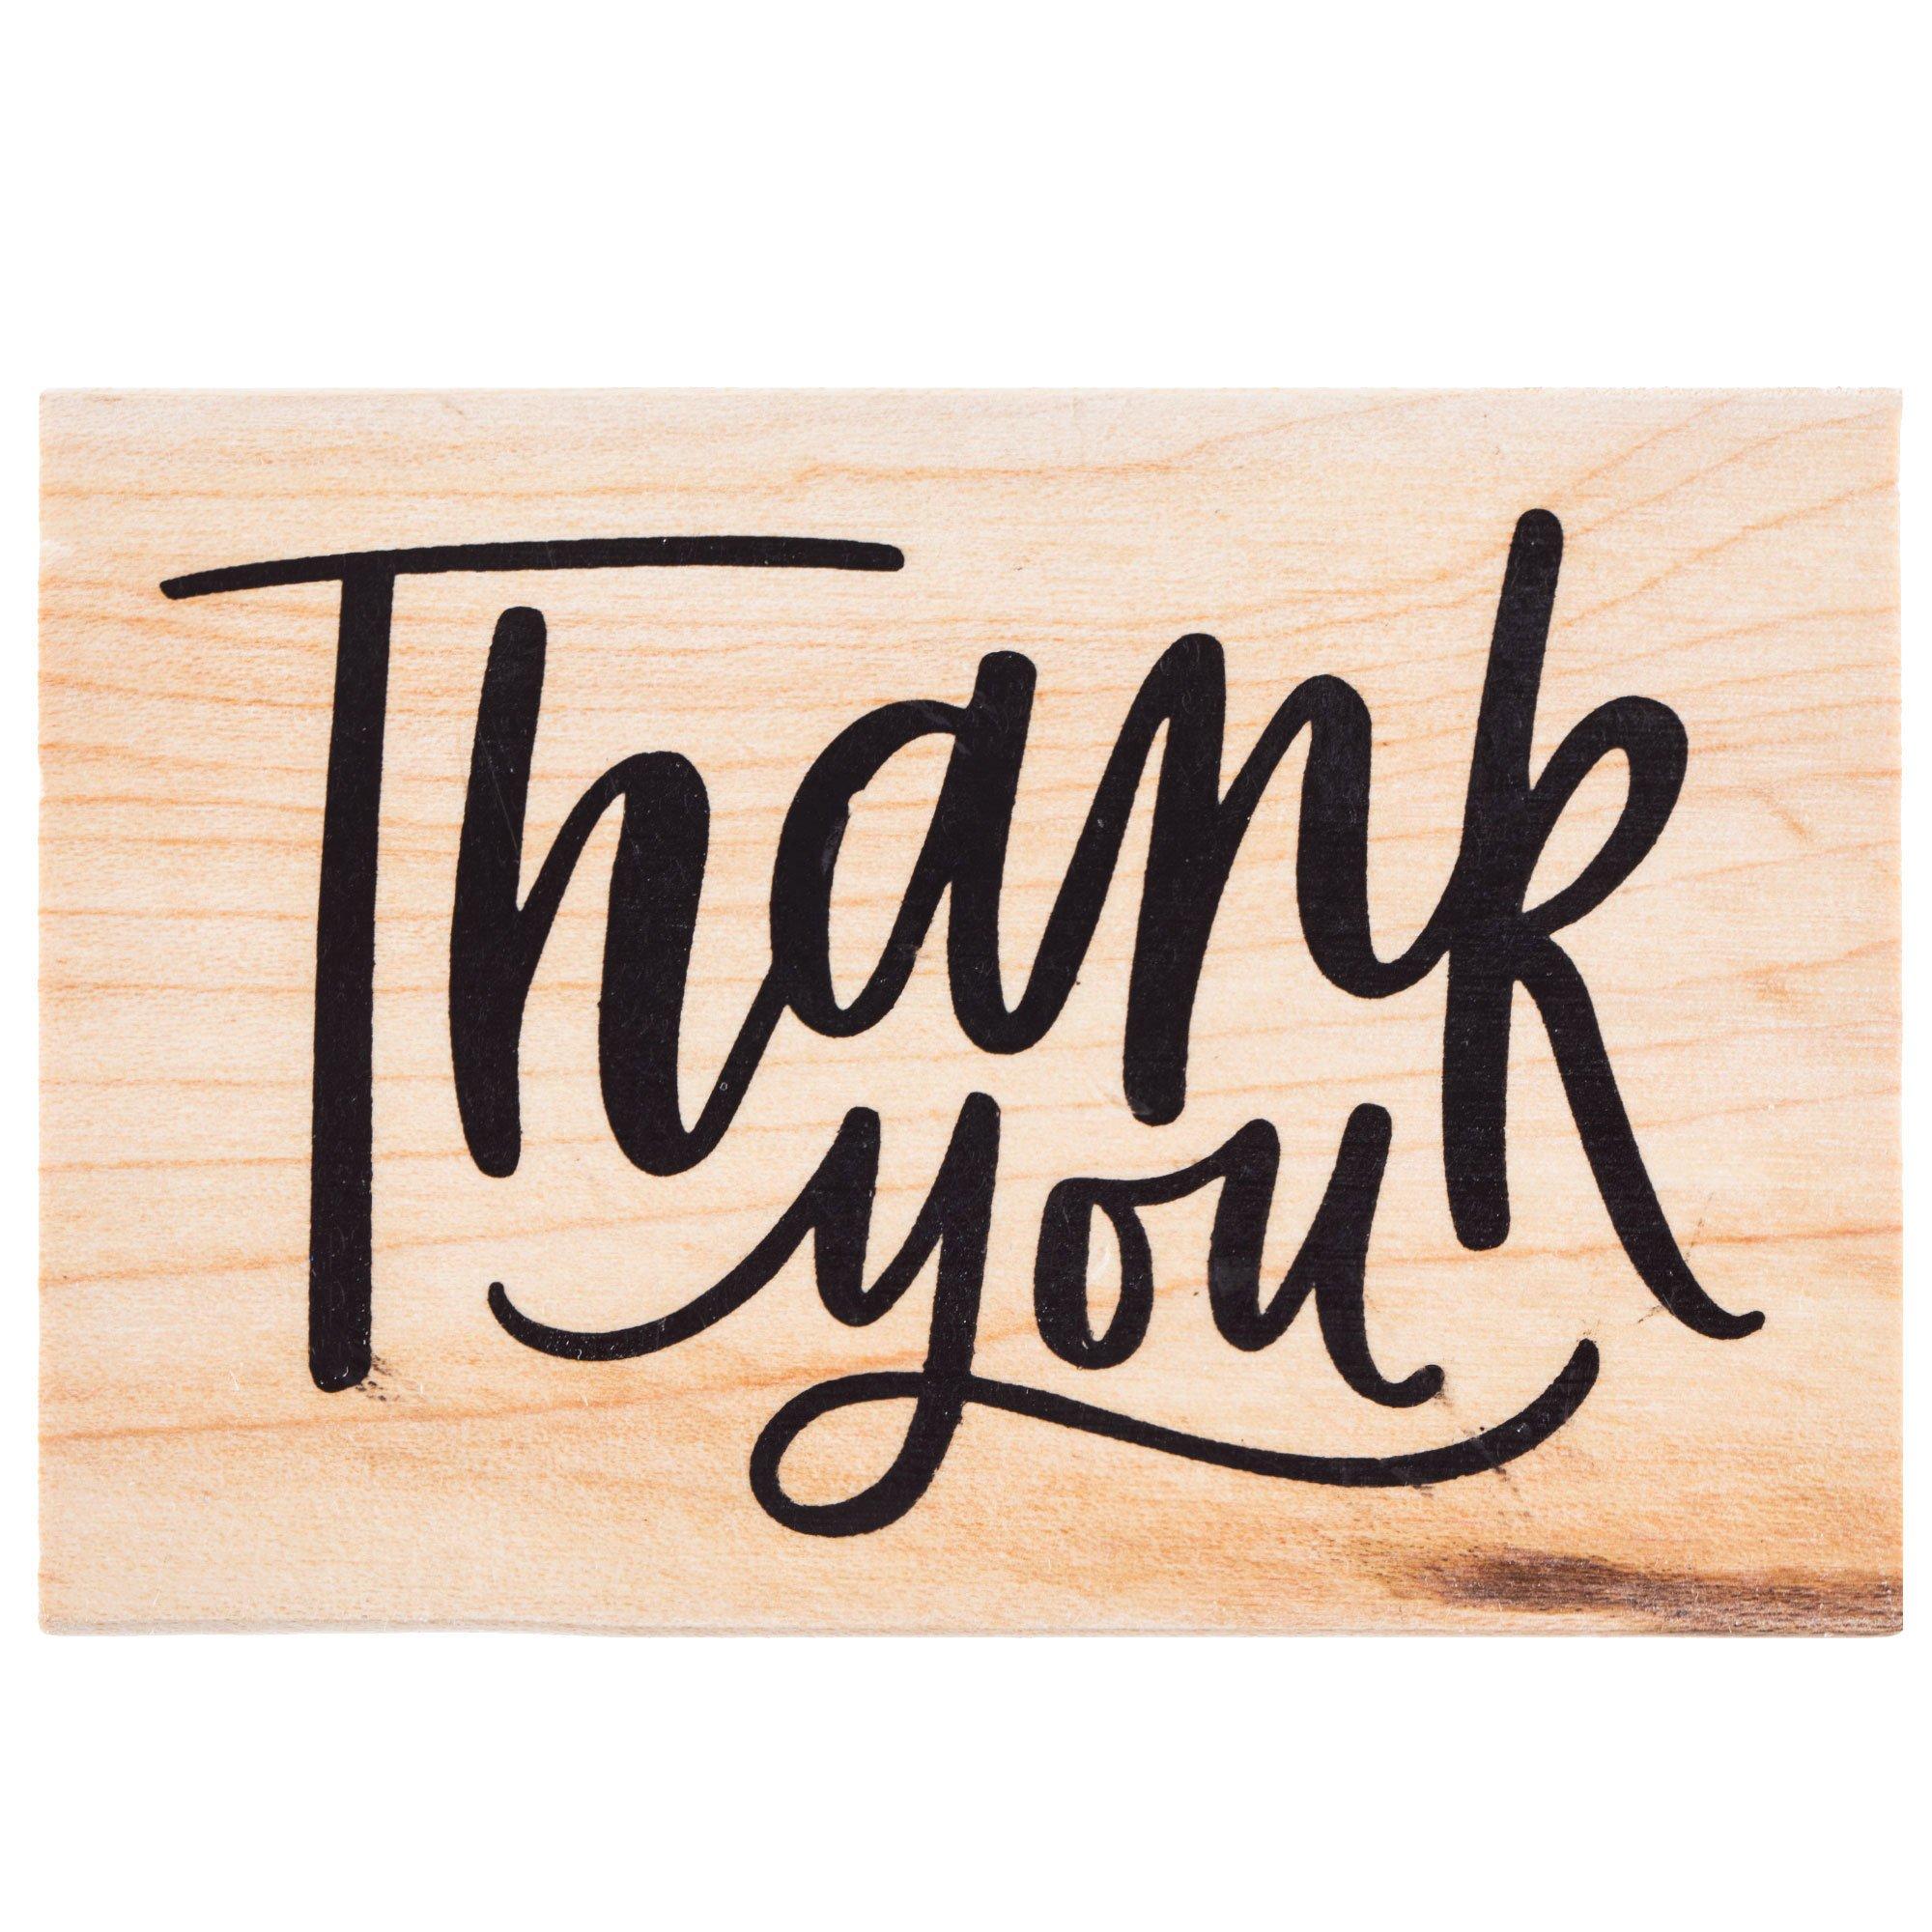 Thank You Typewriter Font Wooden Rubber Stamp Crafts Party Supply Papercraft